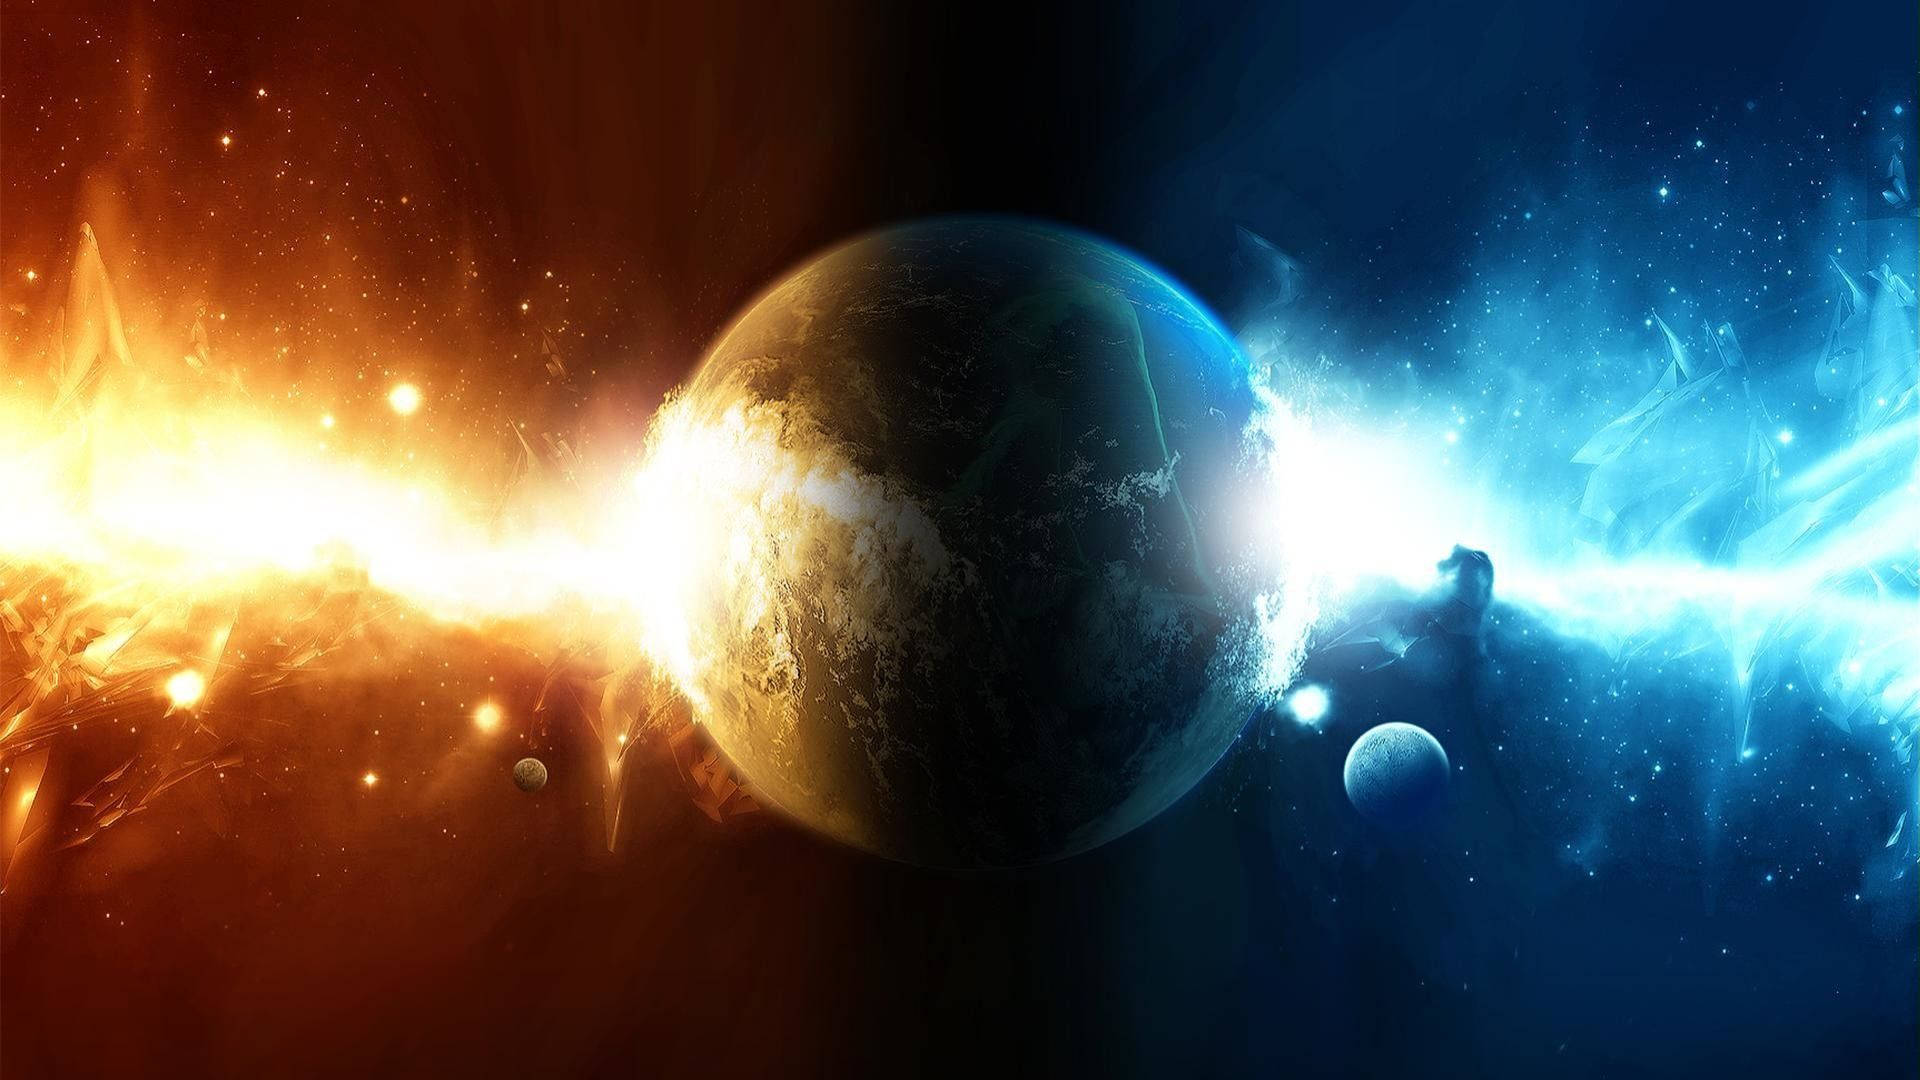 Amazing Water And Fire Planet Background